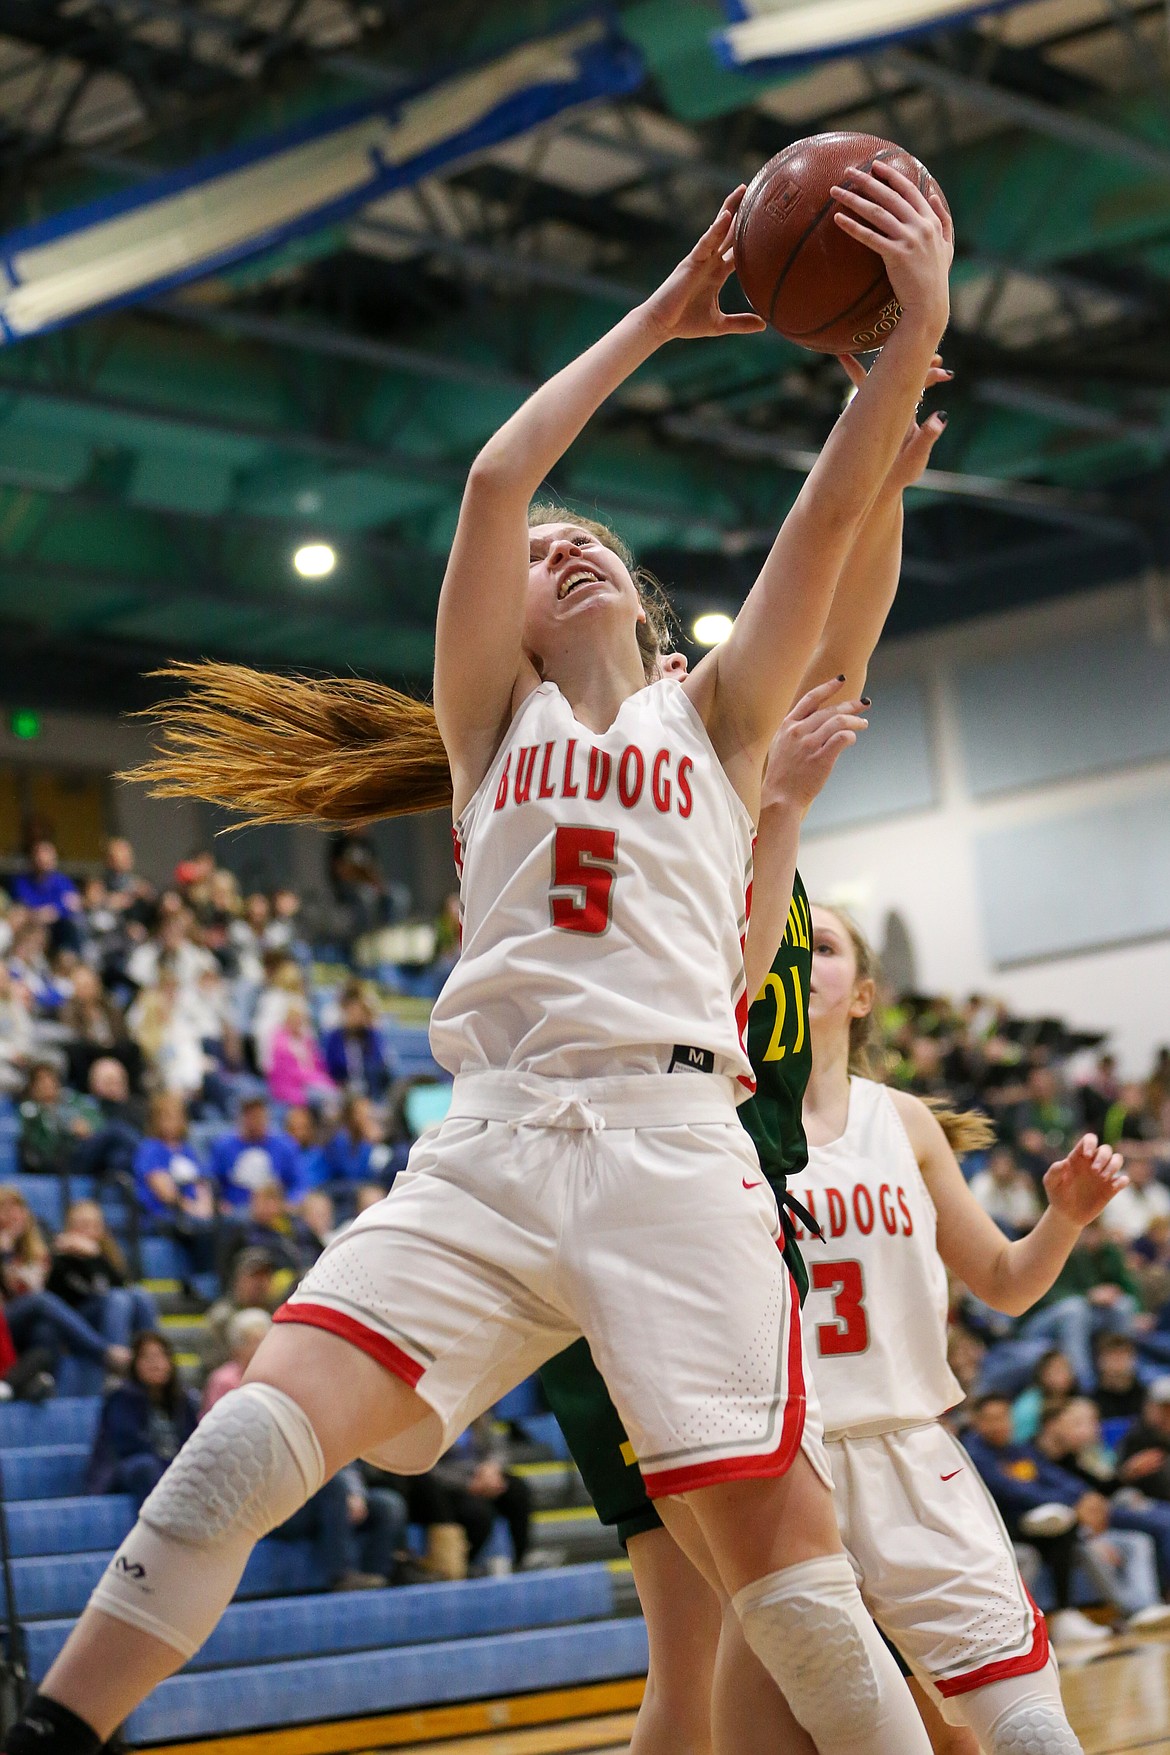 (Photo courtesy of JASON DUCHOW PHOTOGRAPHY) 
 Senior Dawson Driggs claimed a share of the North Idaho Athletic Hall of Fame's 5A-4A girls' basketball award.